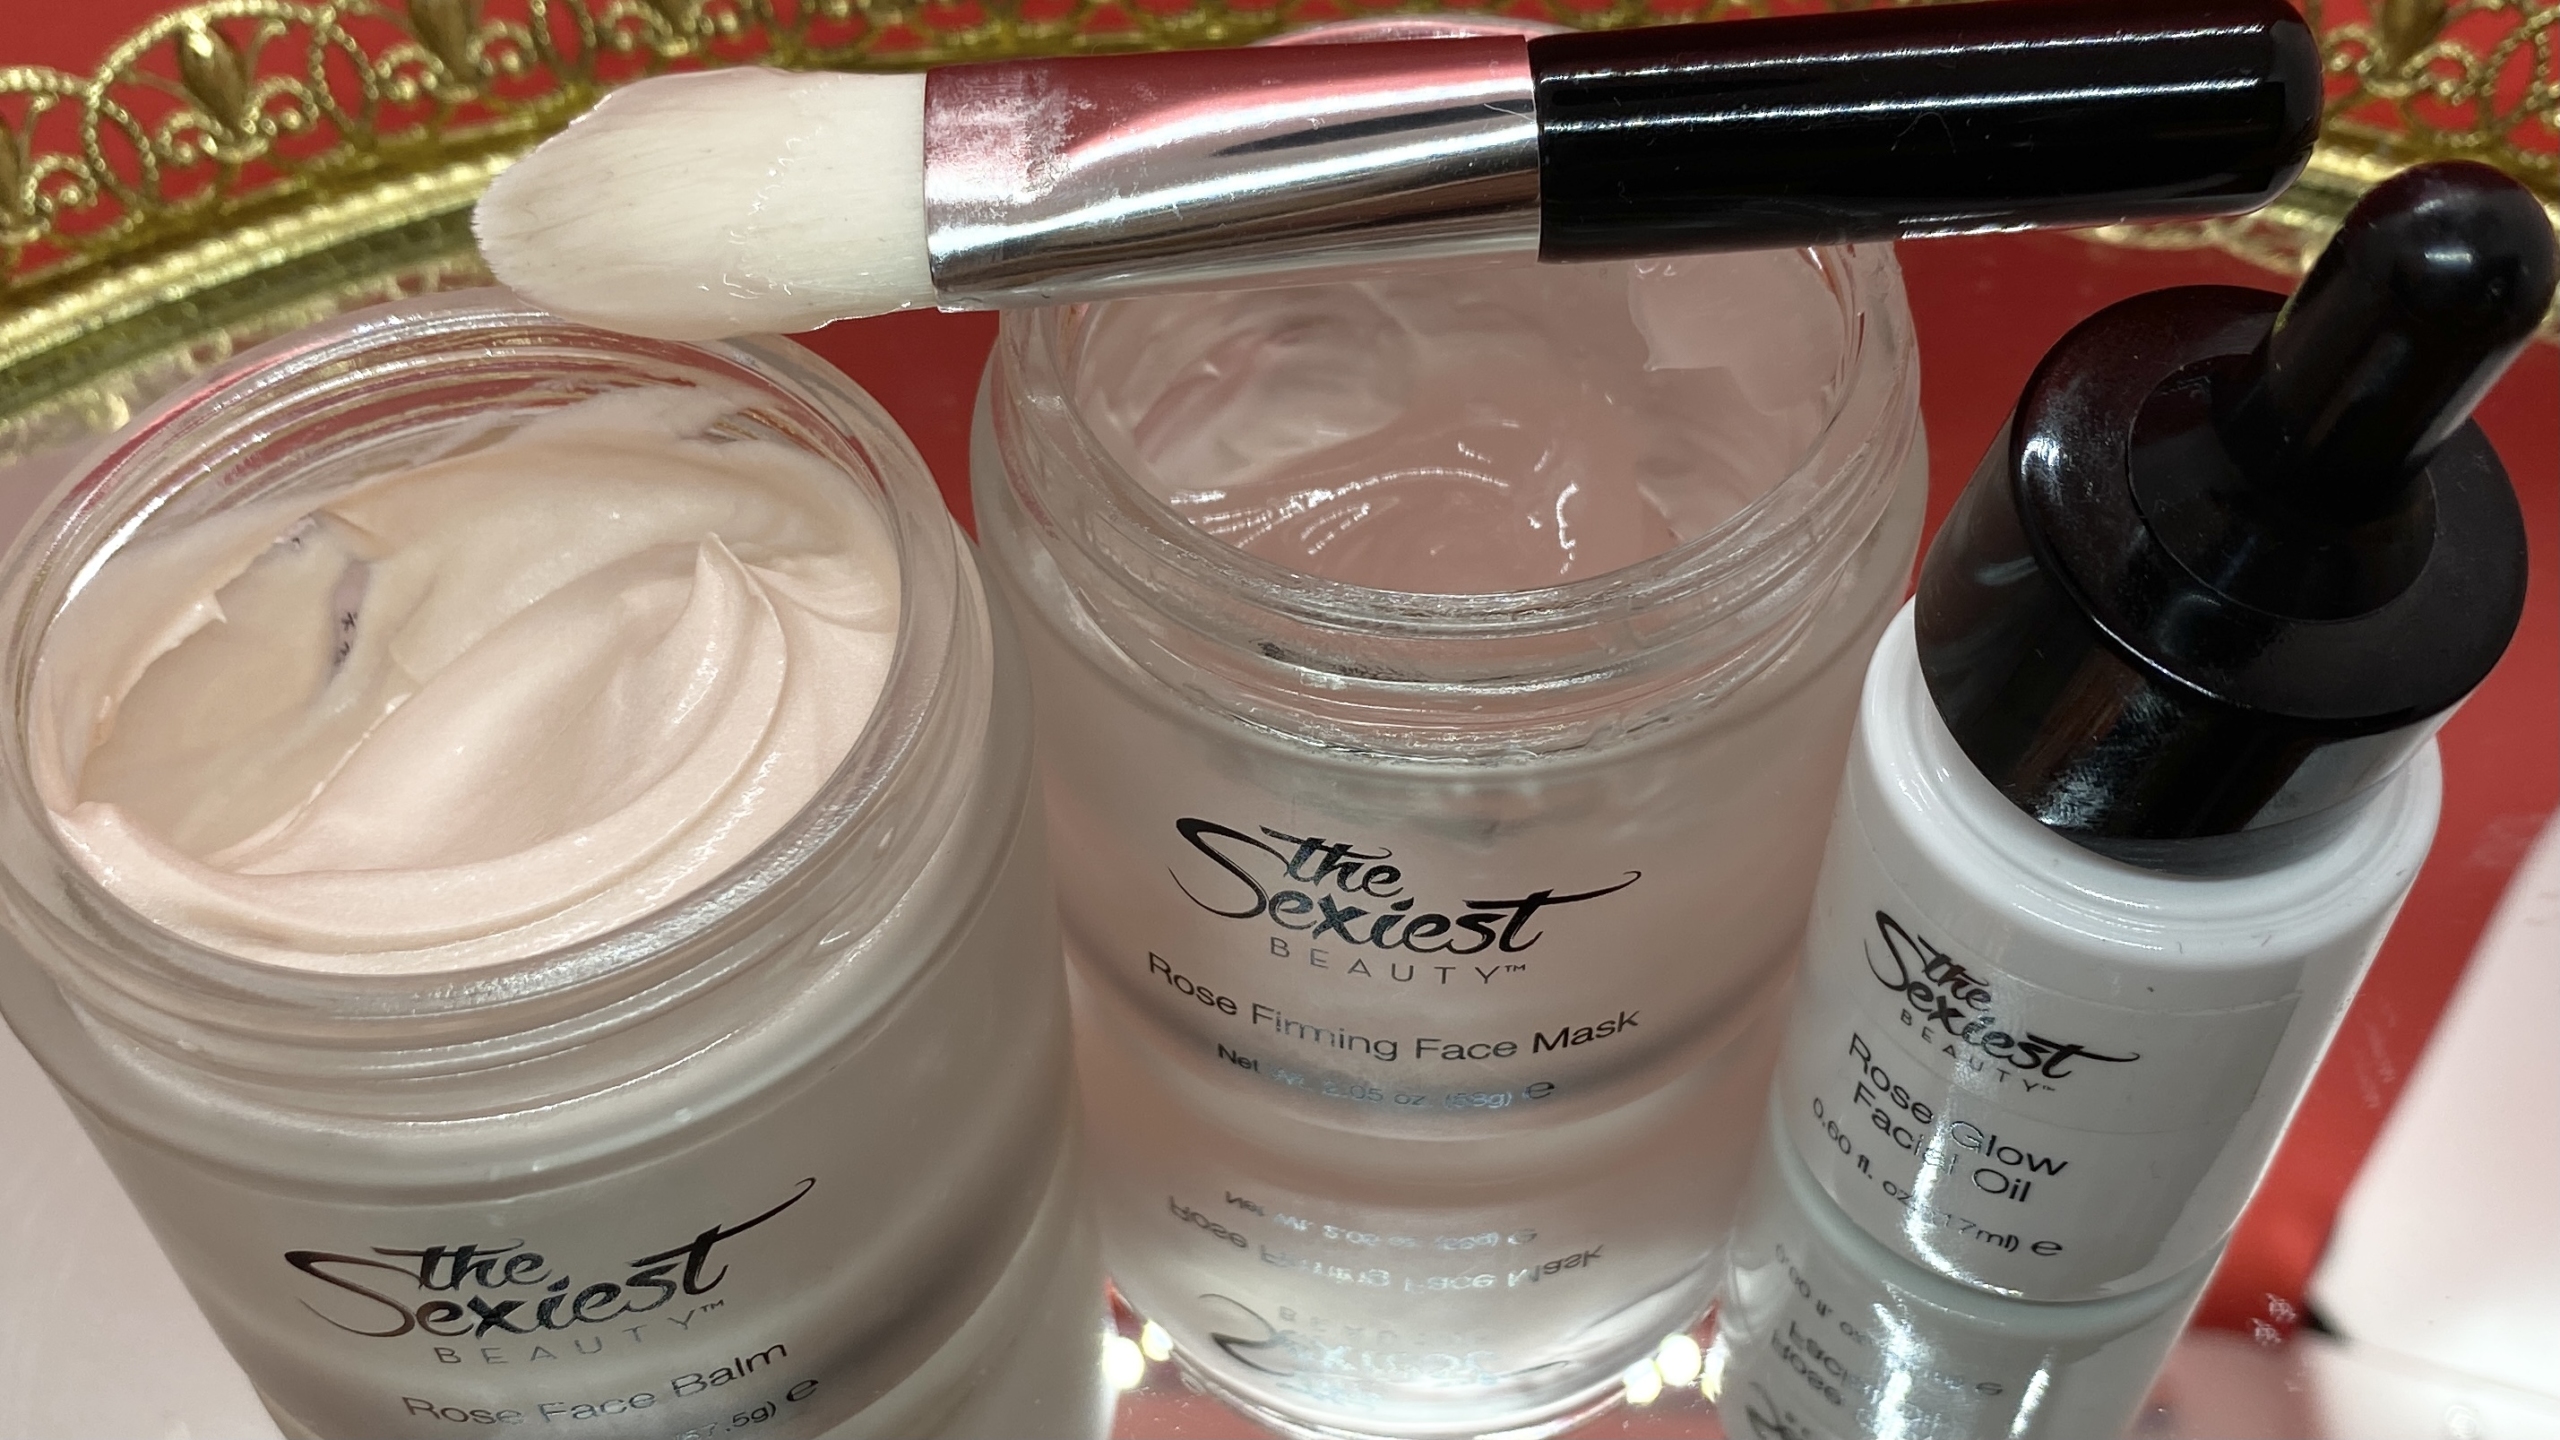 The Sexiest Beauty mask, balm, oil and brush